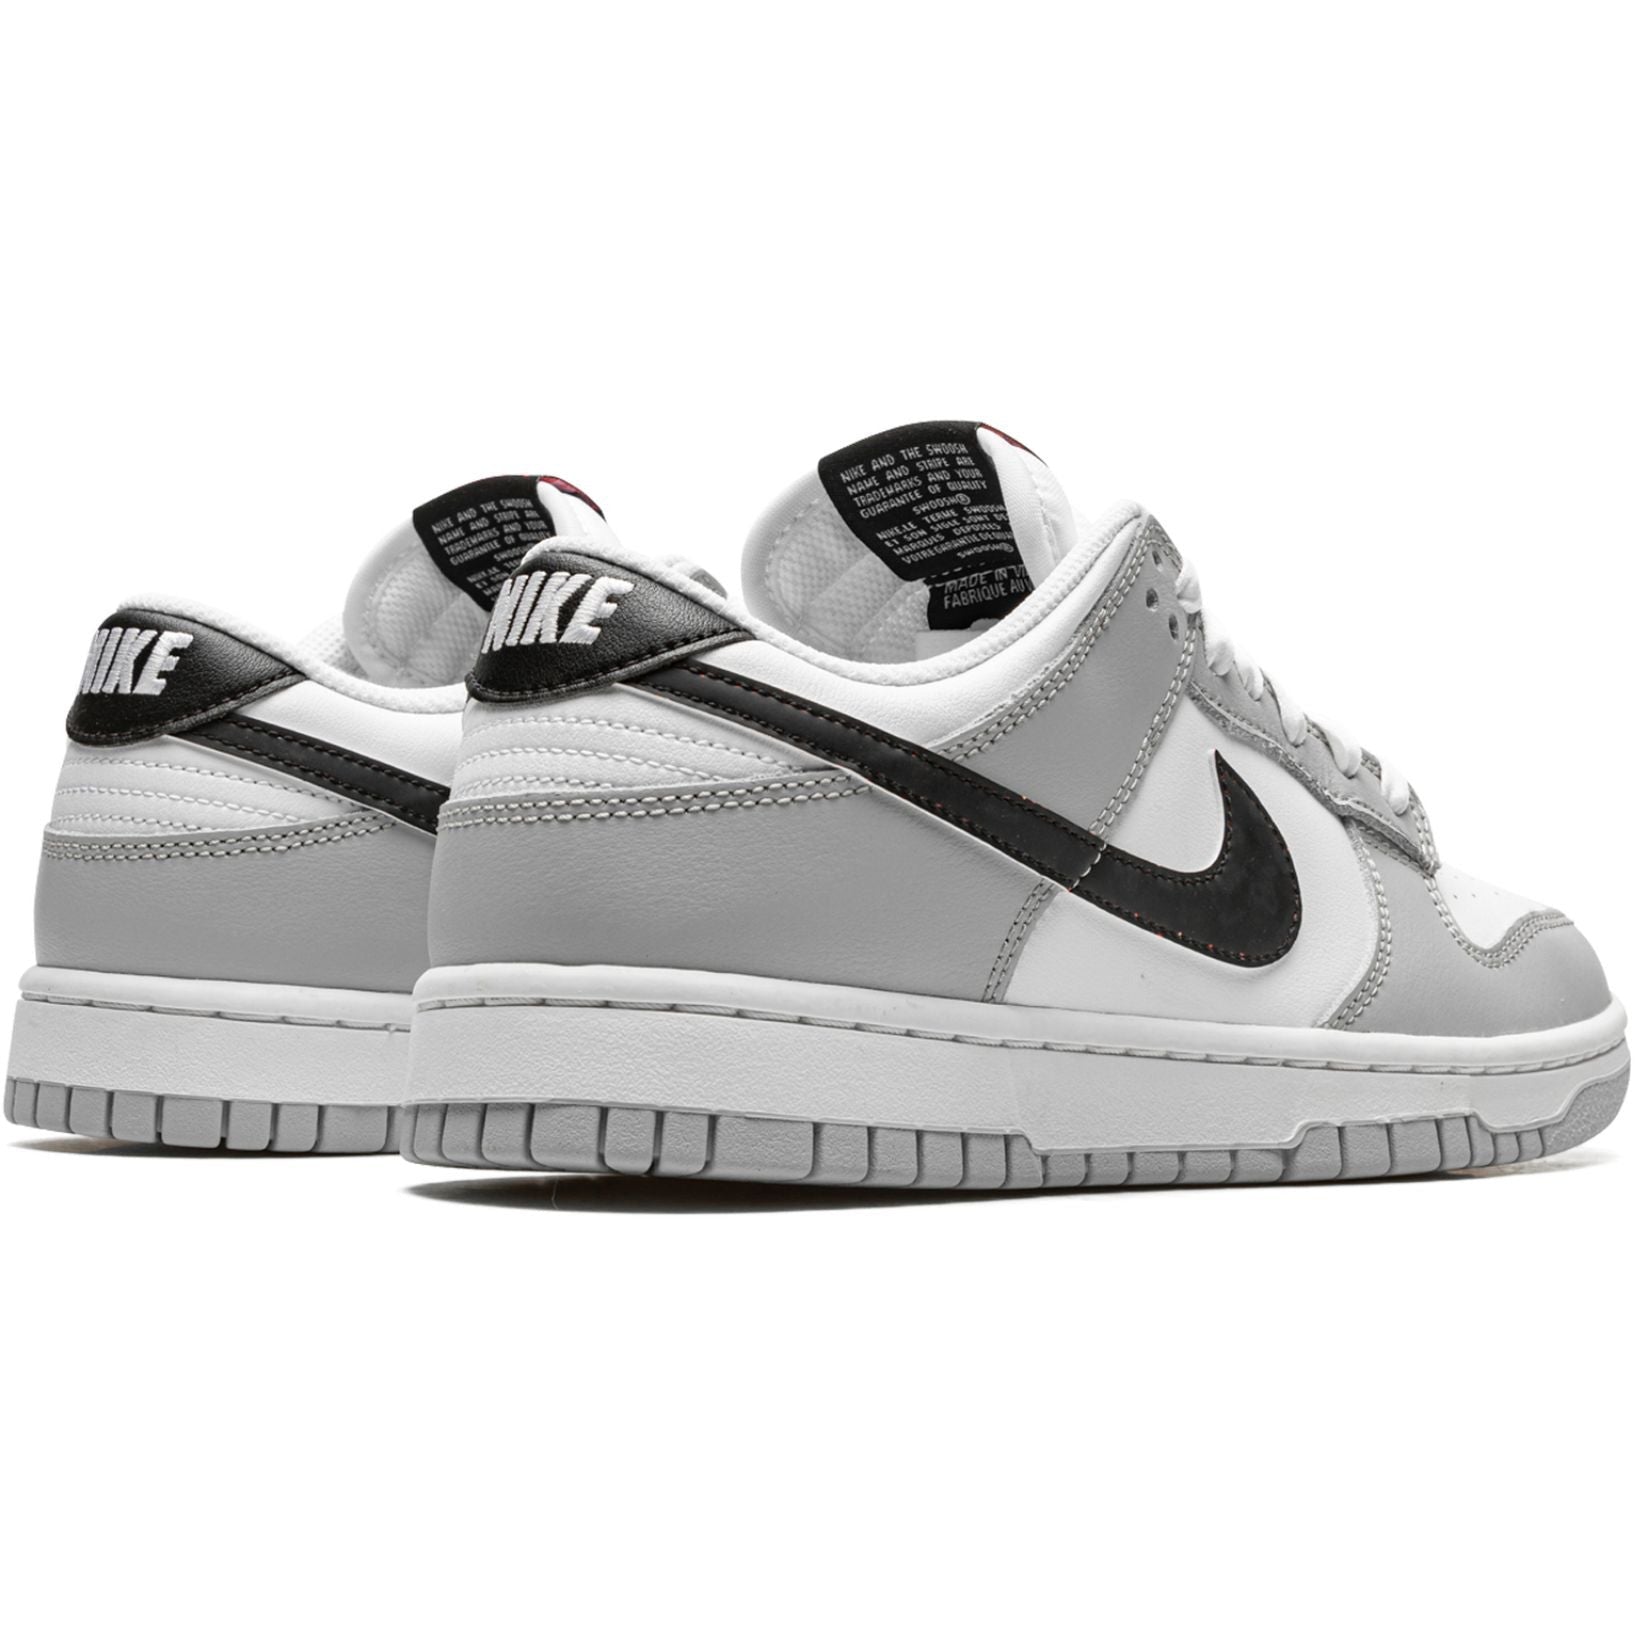 DUNK LOW SE "Lottery Pack - Grey"